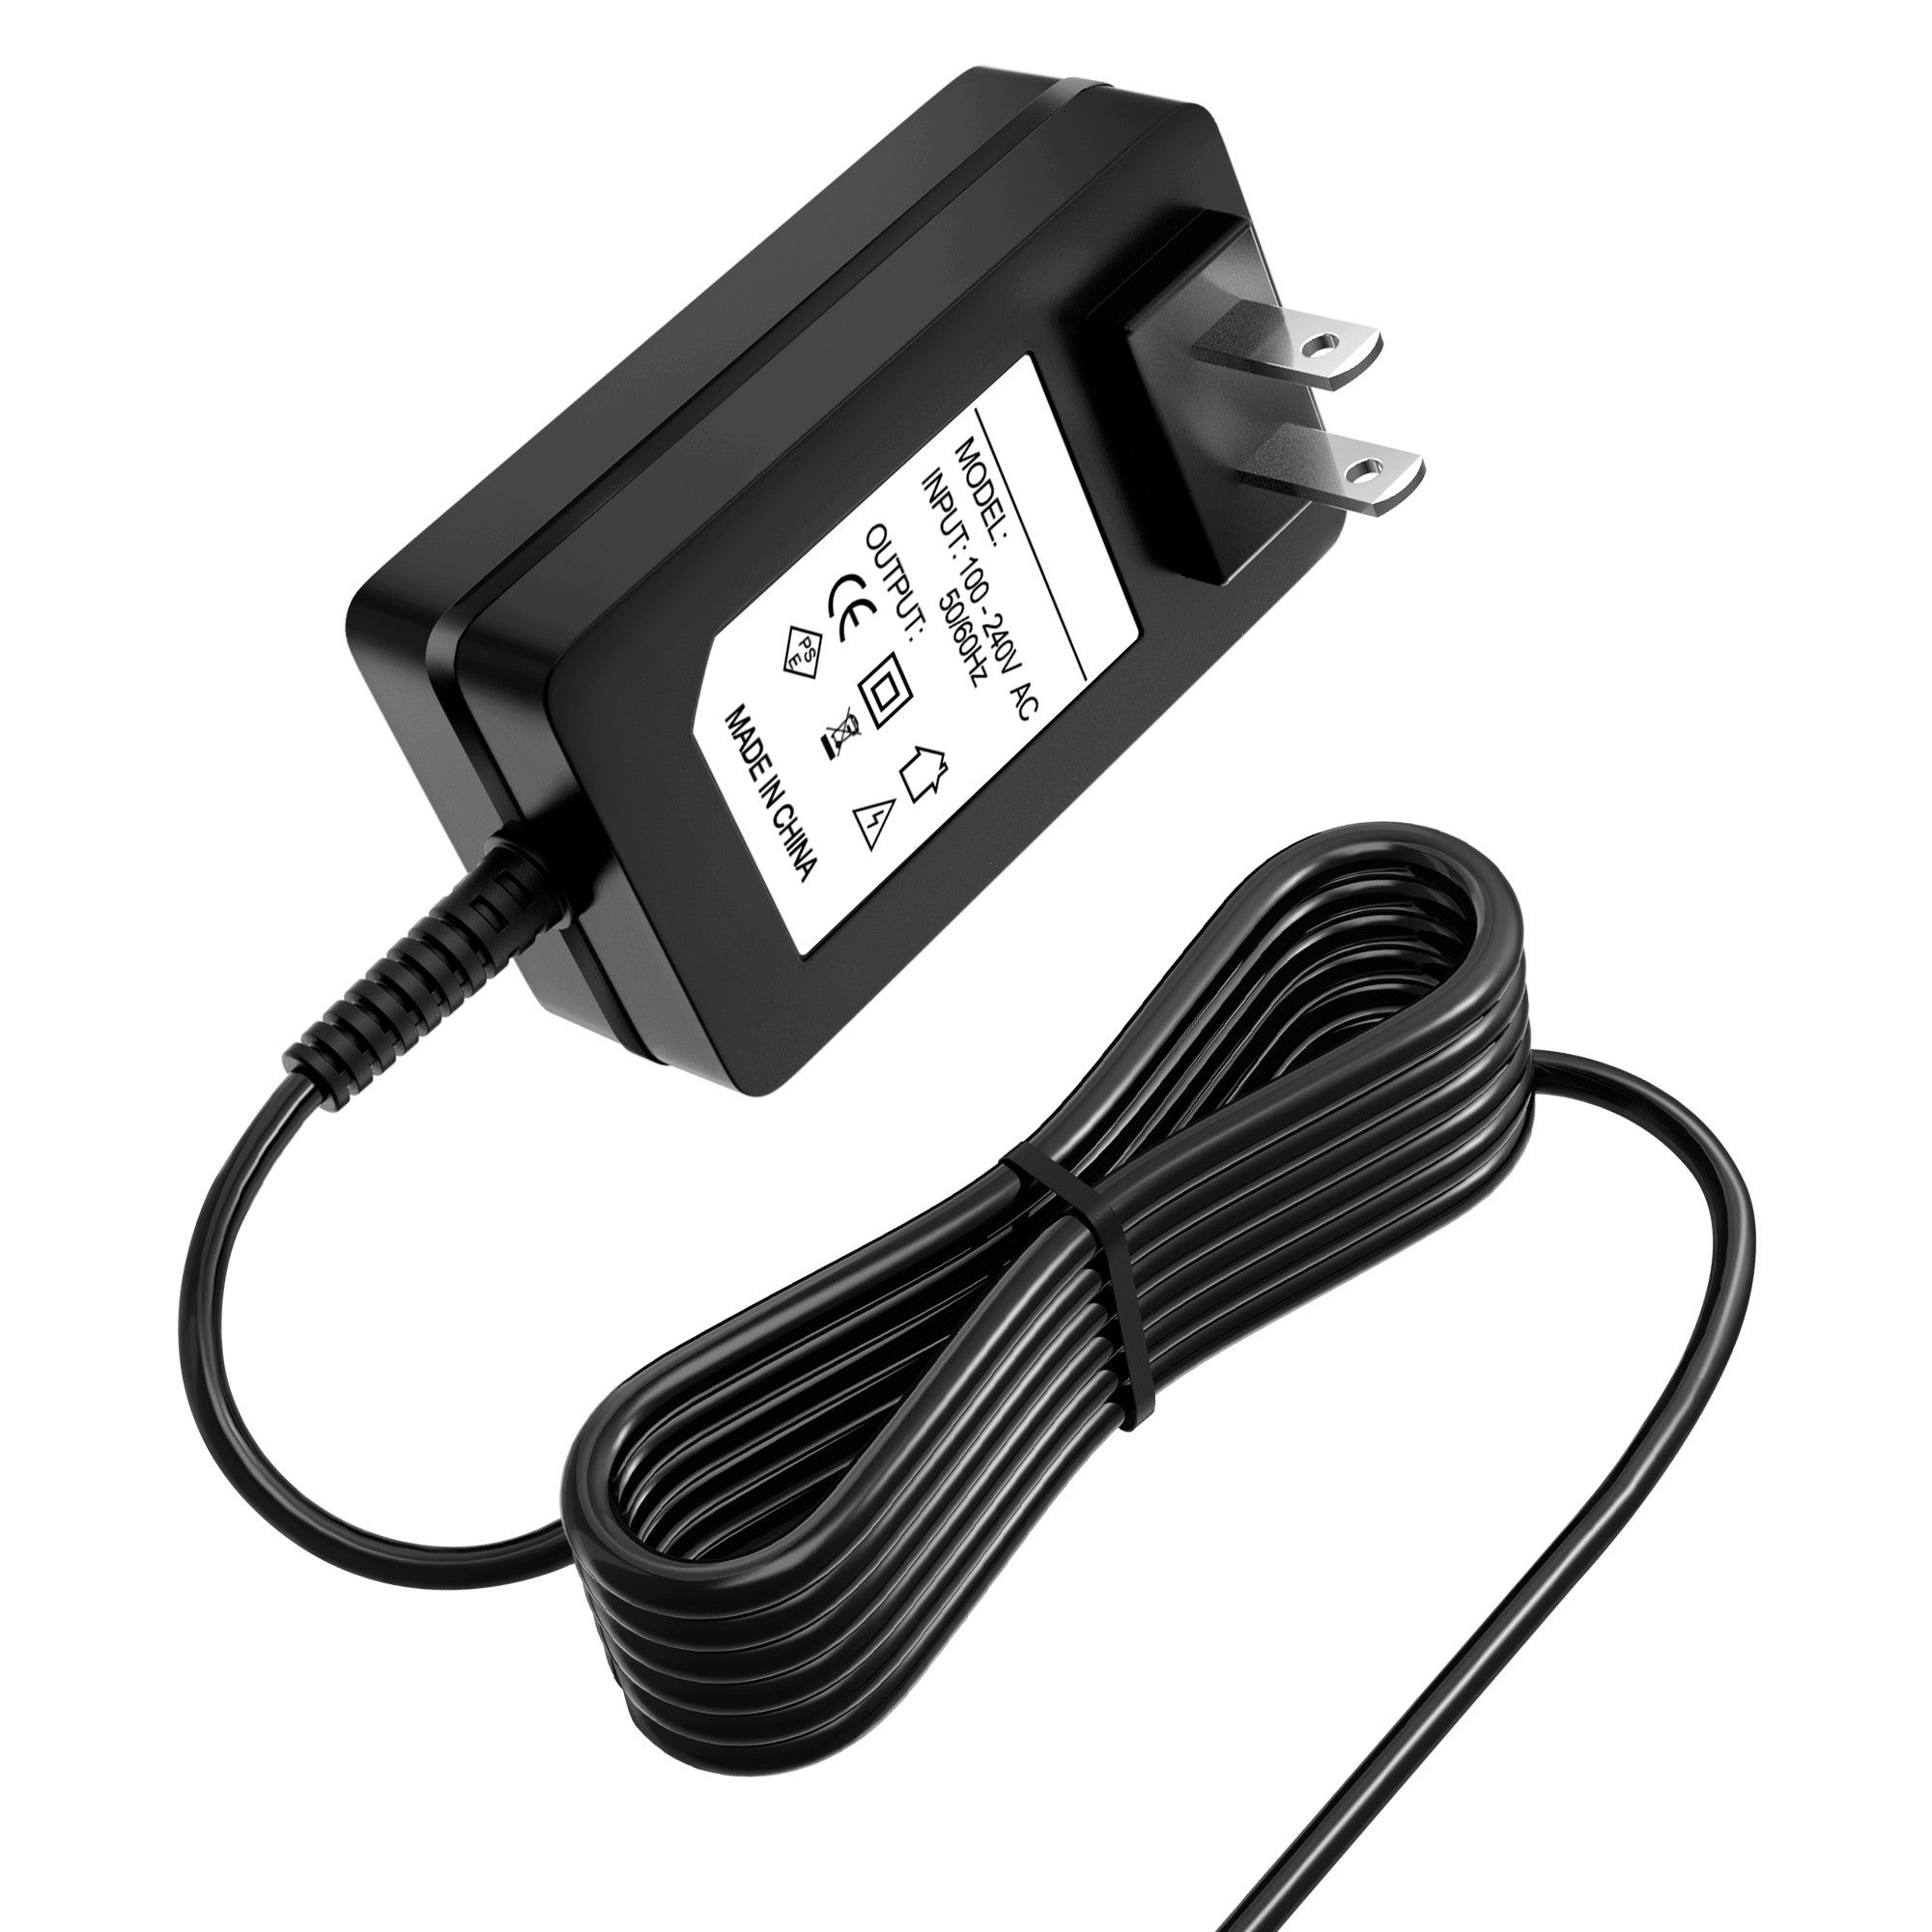 AbleGrid AC Adapter Compatible with Canon MG1-3607-060 MG1-3607-050 Power Supply Charger Cable Cord